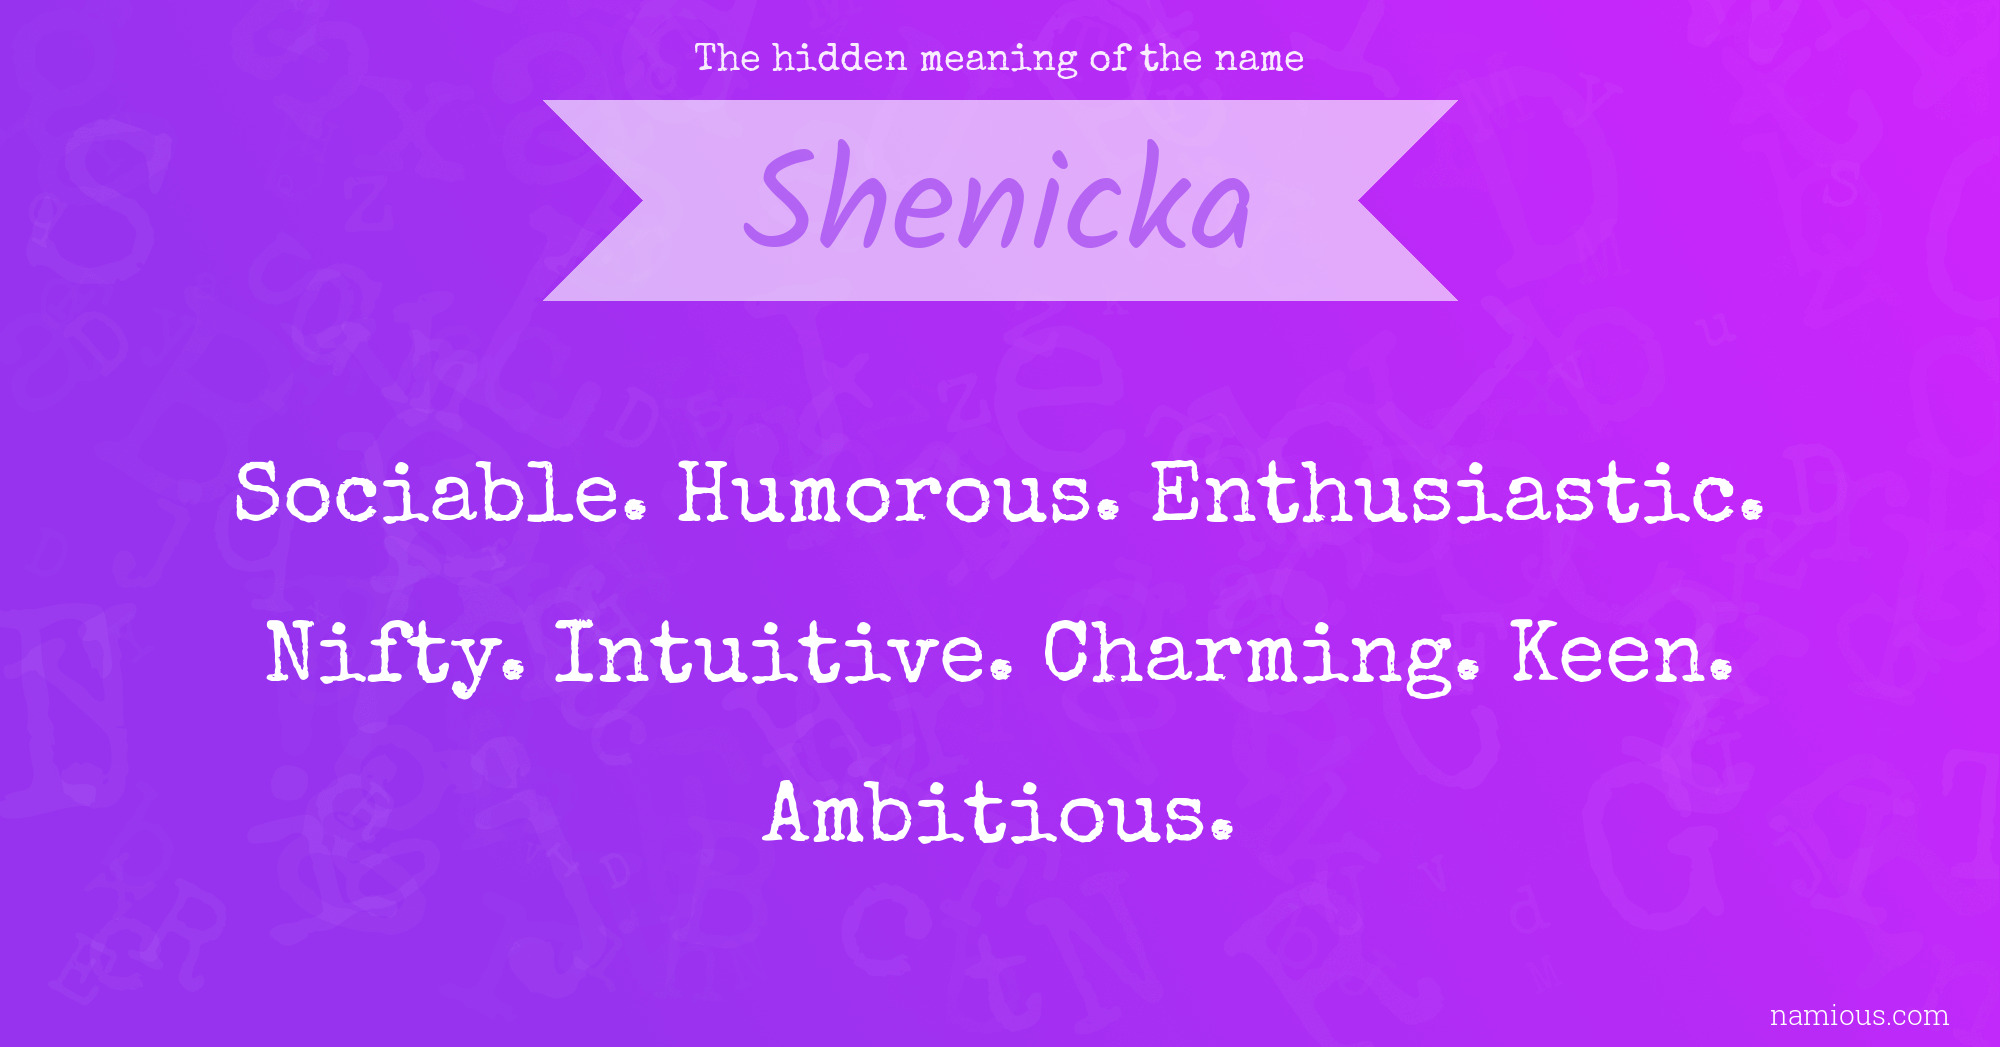 The hidden meaning of the name Shenicka